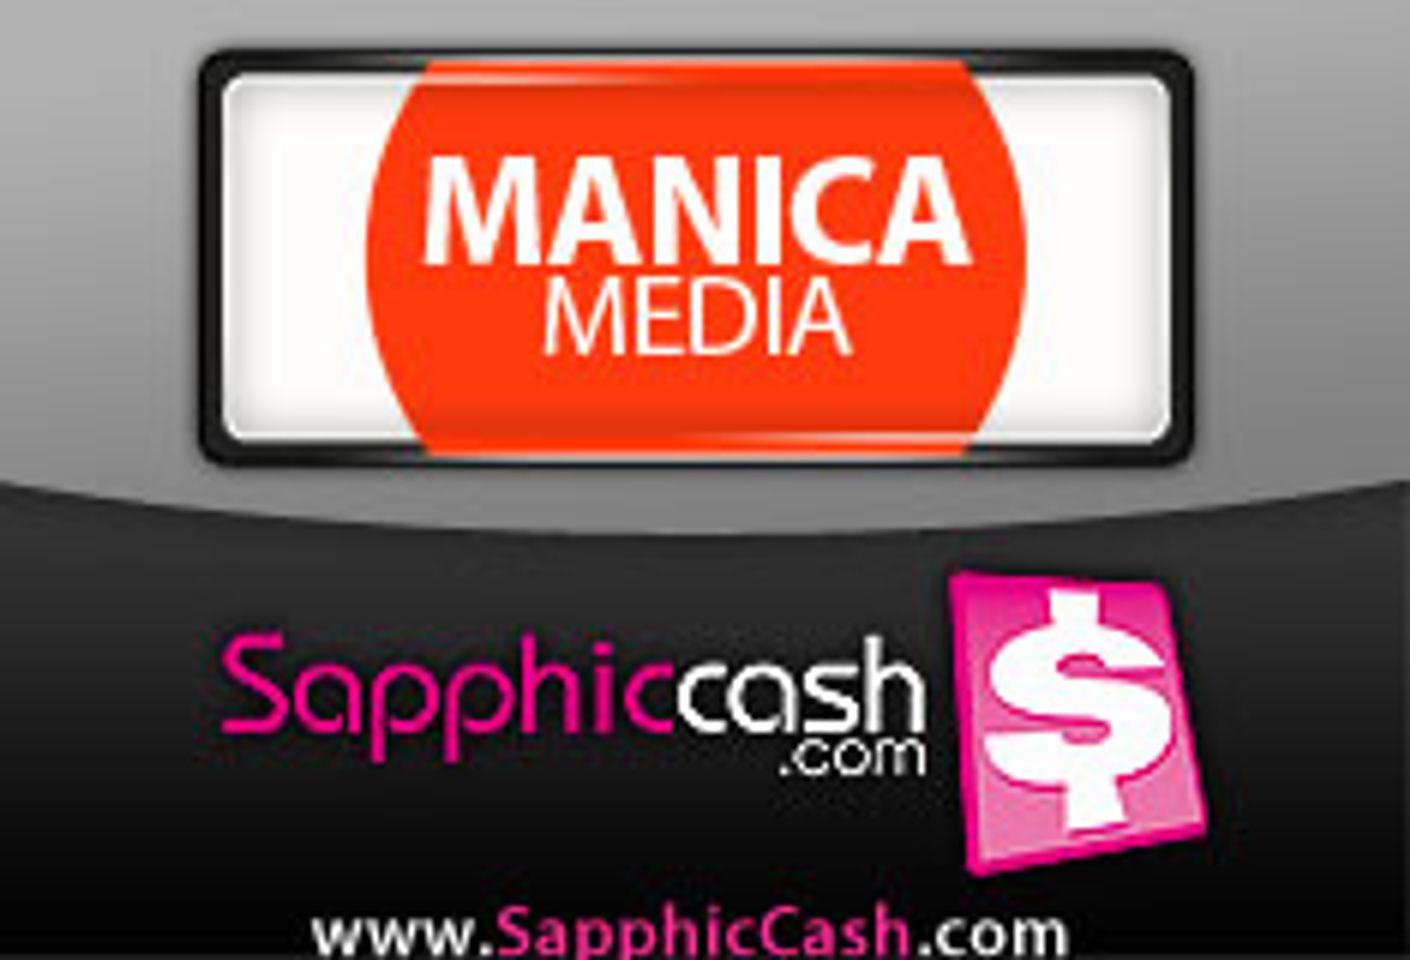 SapphicCash Exclusive Content Now Powered by Manica Media